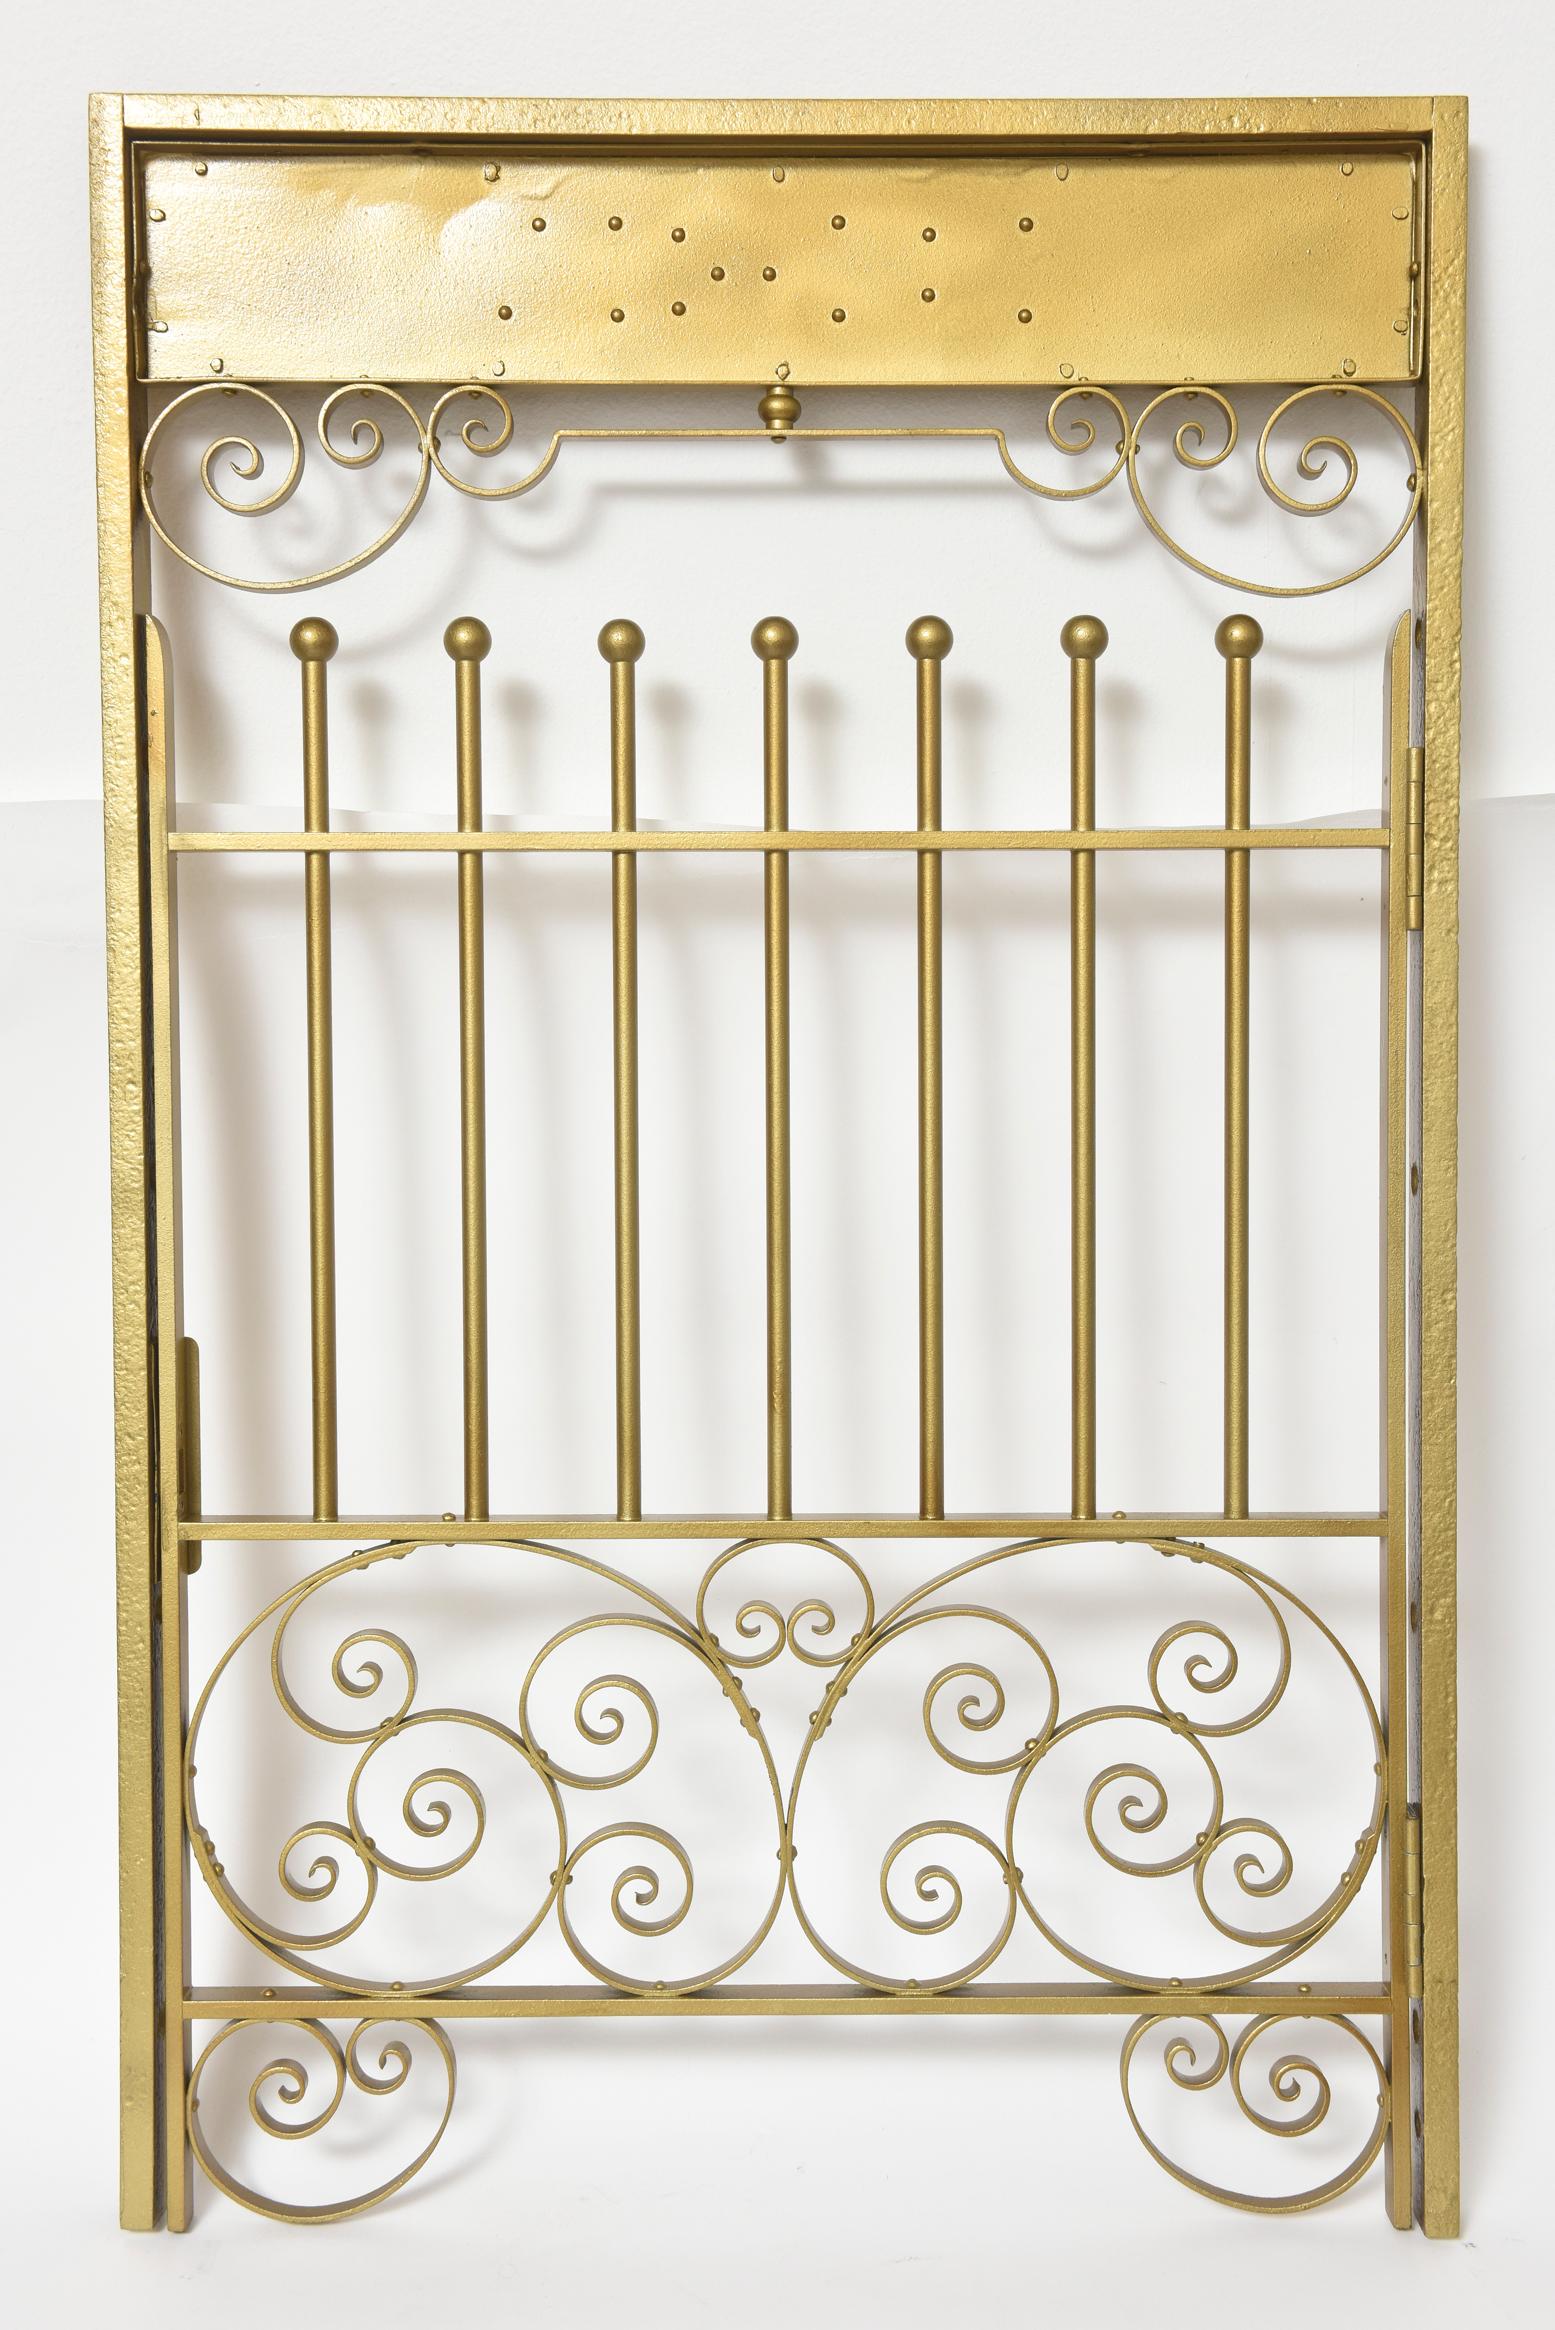 Wrought Iron Antique Brass Finish on Iron Cashier Bank Teller or Post Office Cage Window